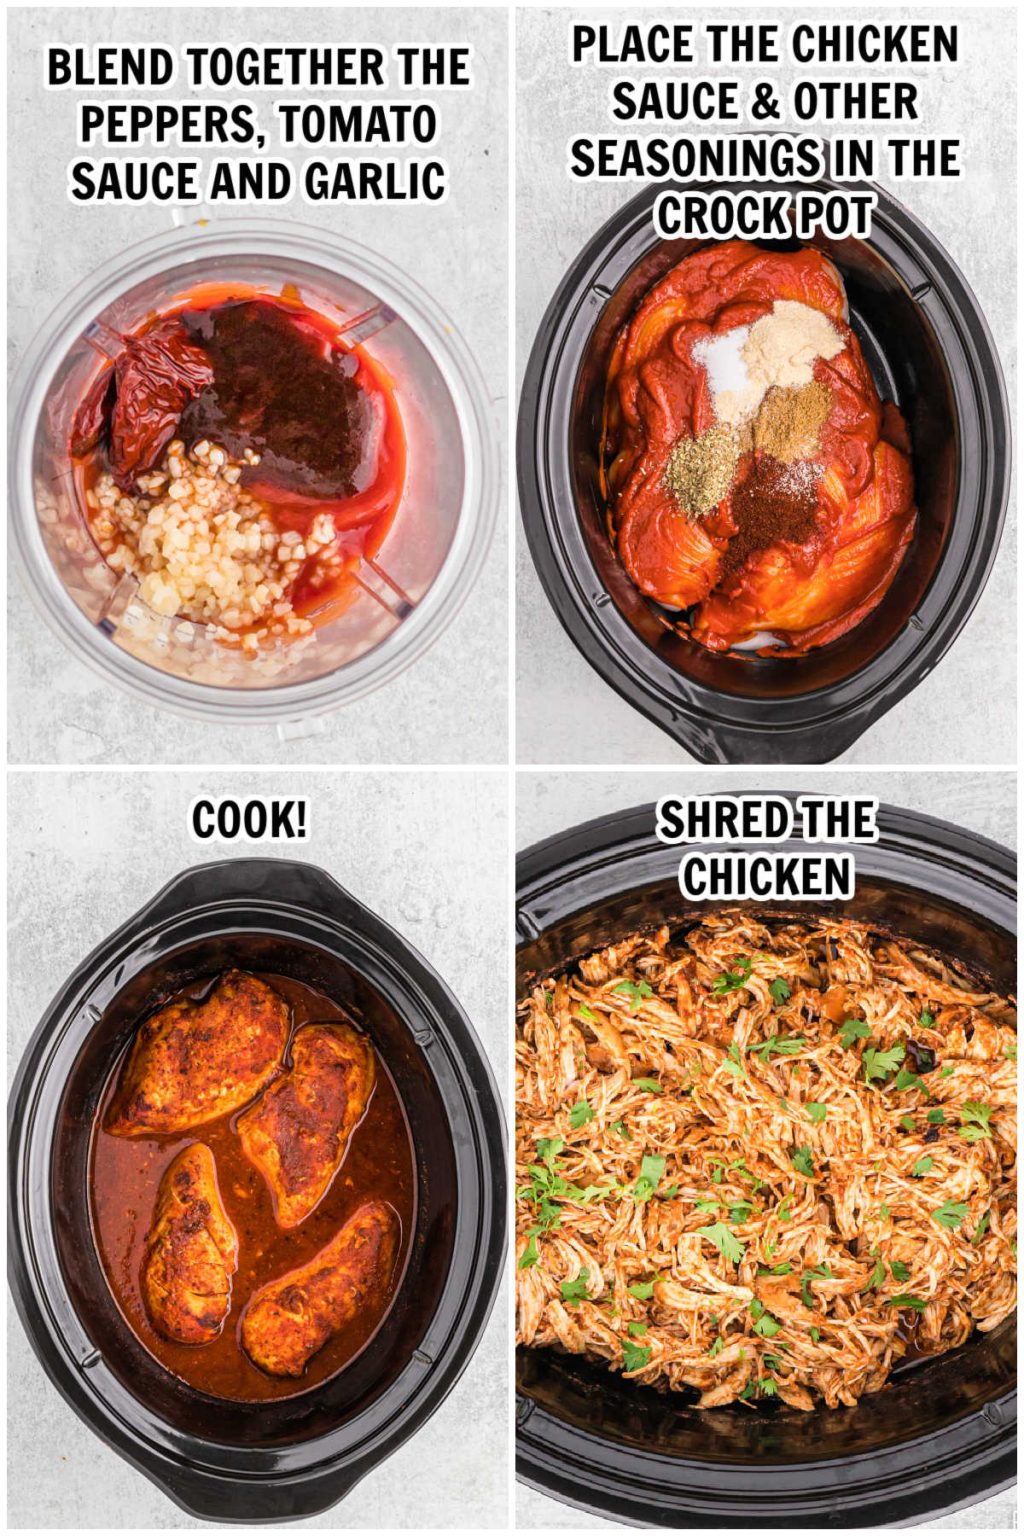 Crock Pot Chipotle Chicken Recipe - Perfect for busy weeknights!